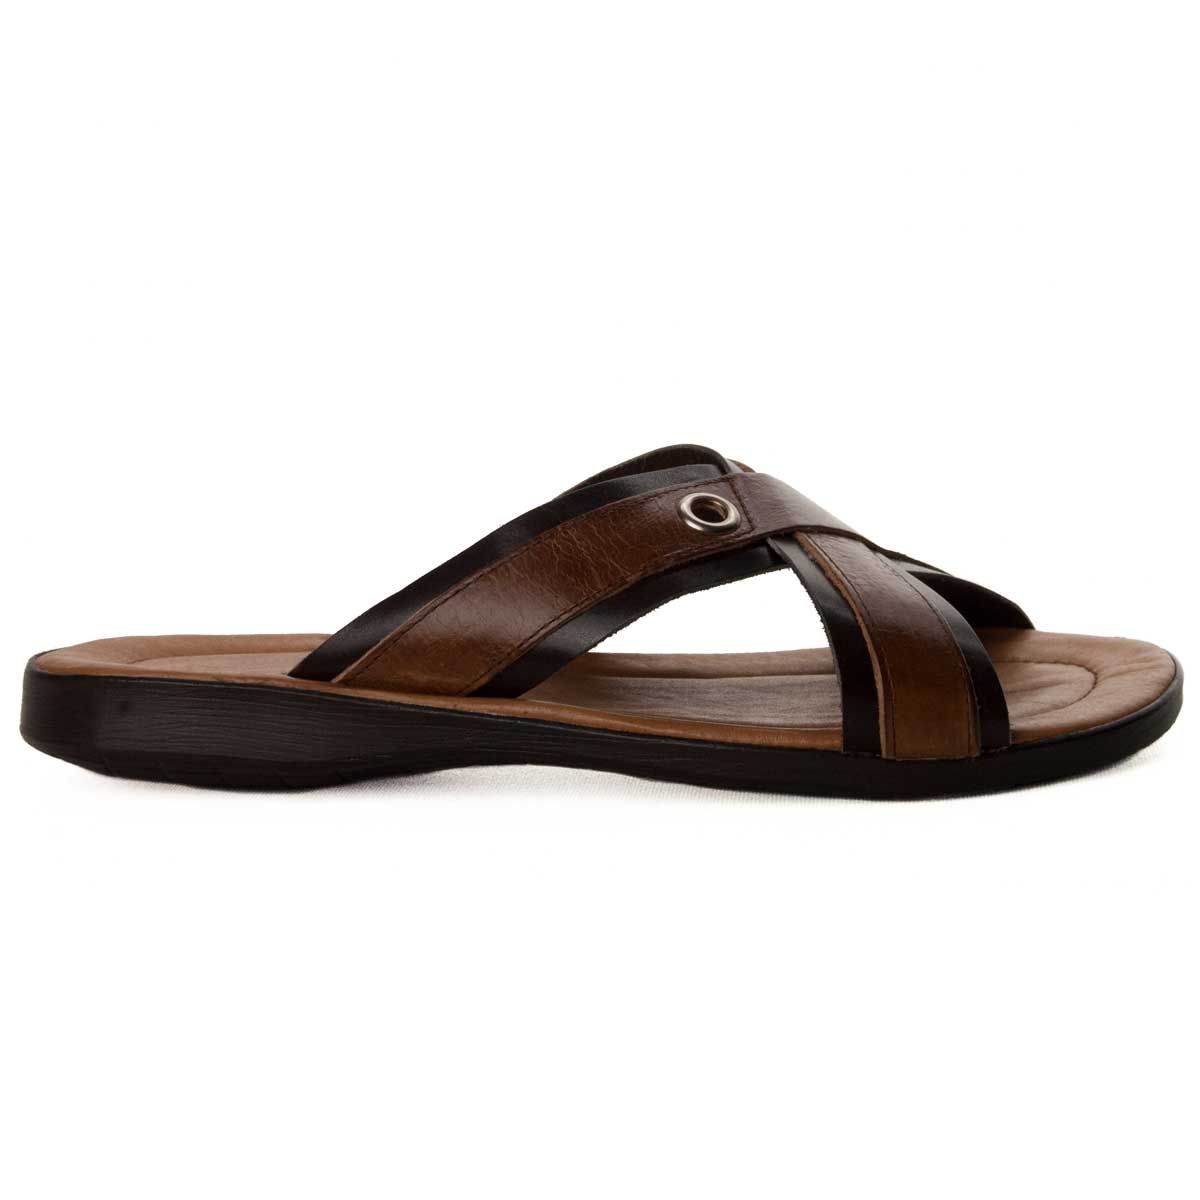 Men's skin sandal, with maximum comfort on the floor, by its gel, soft and padded template. Anatomical Very summer for his style. Made in Spain,